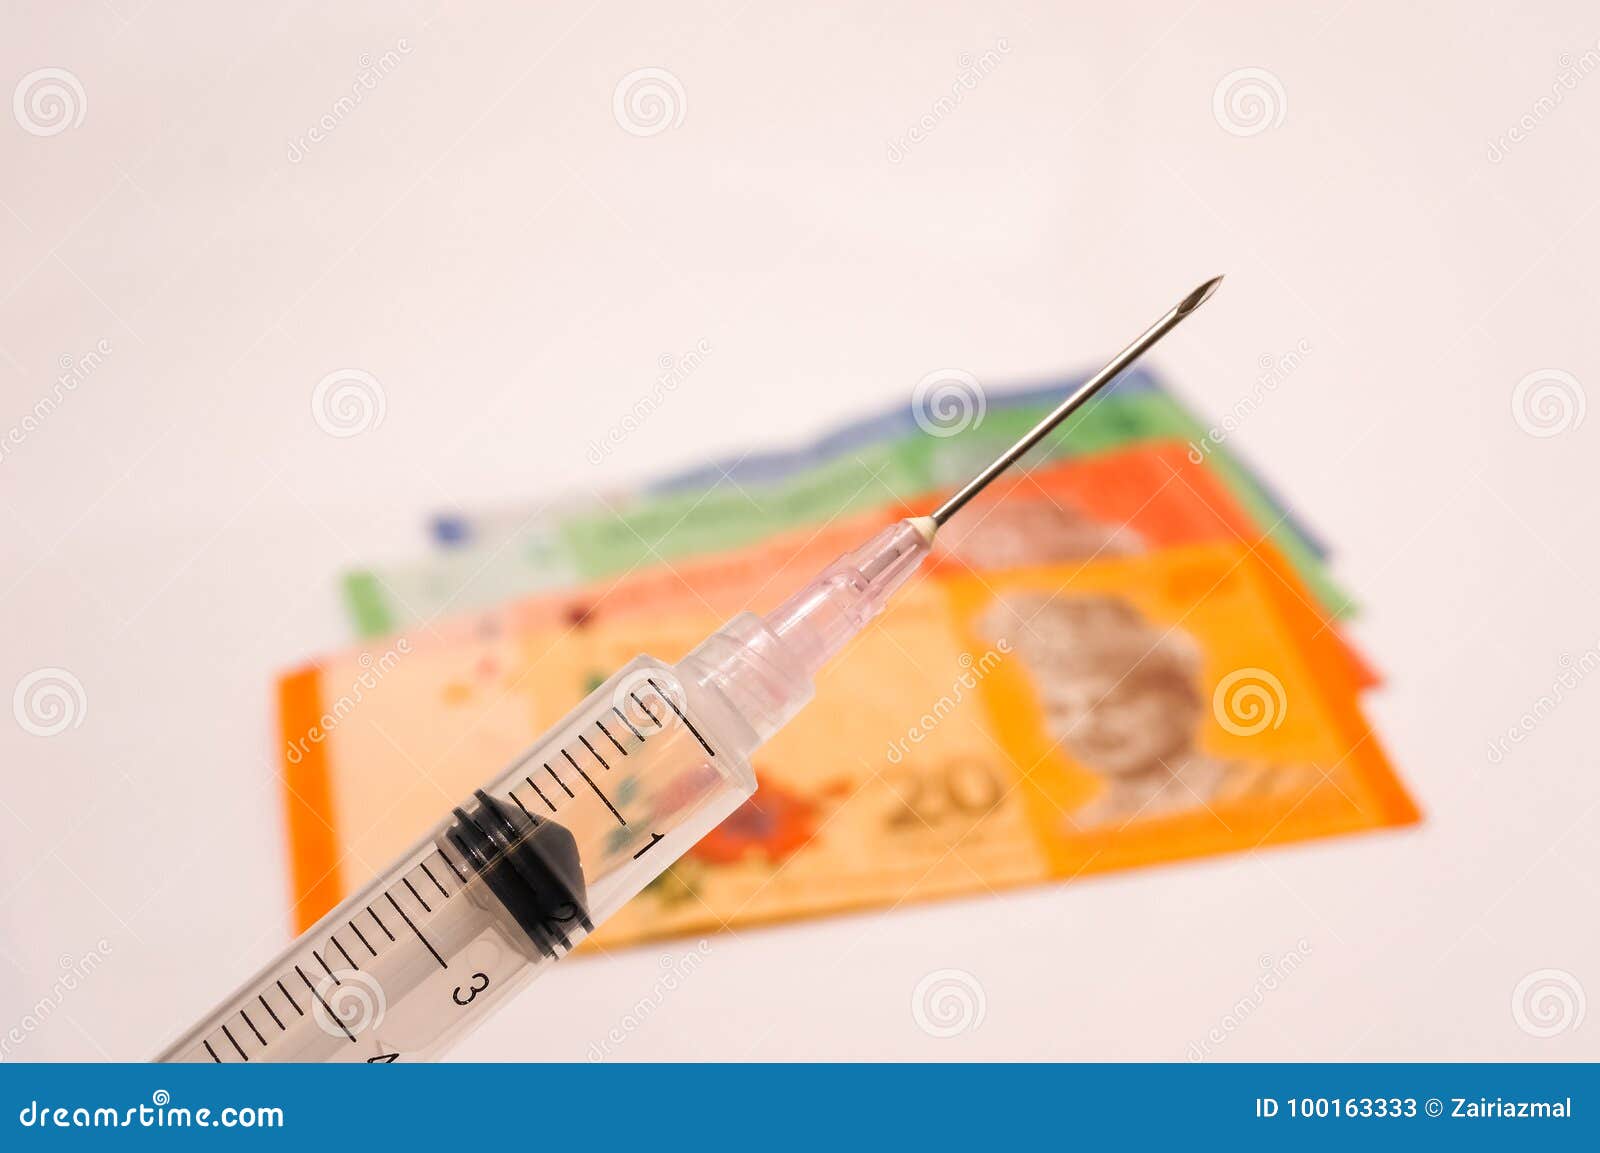 Medical Butterfly Needle On Malaysia Bank Notes Isolated ...